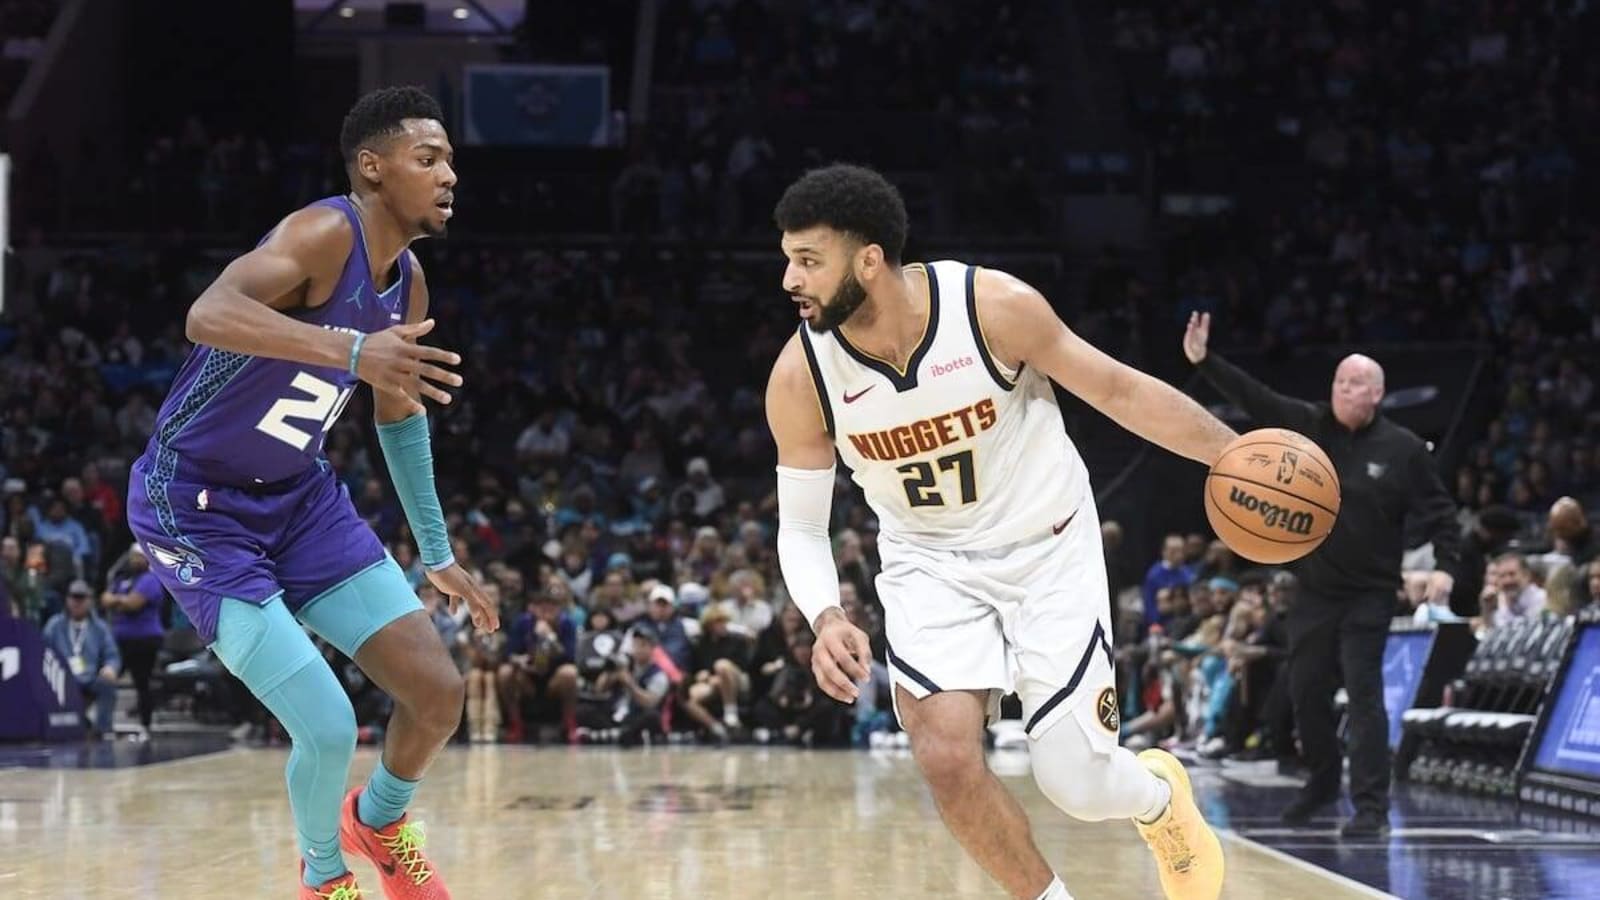 Hornets Fall to Nuggets, 102-95, Despite Excellent First Half